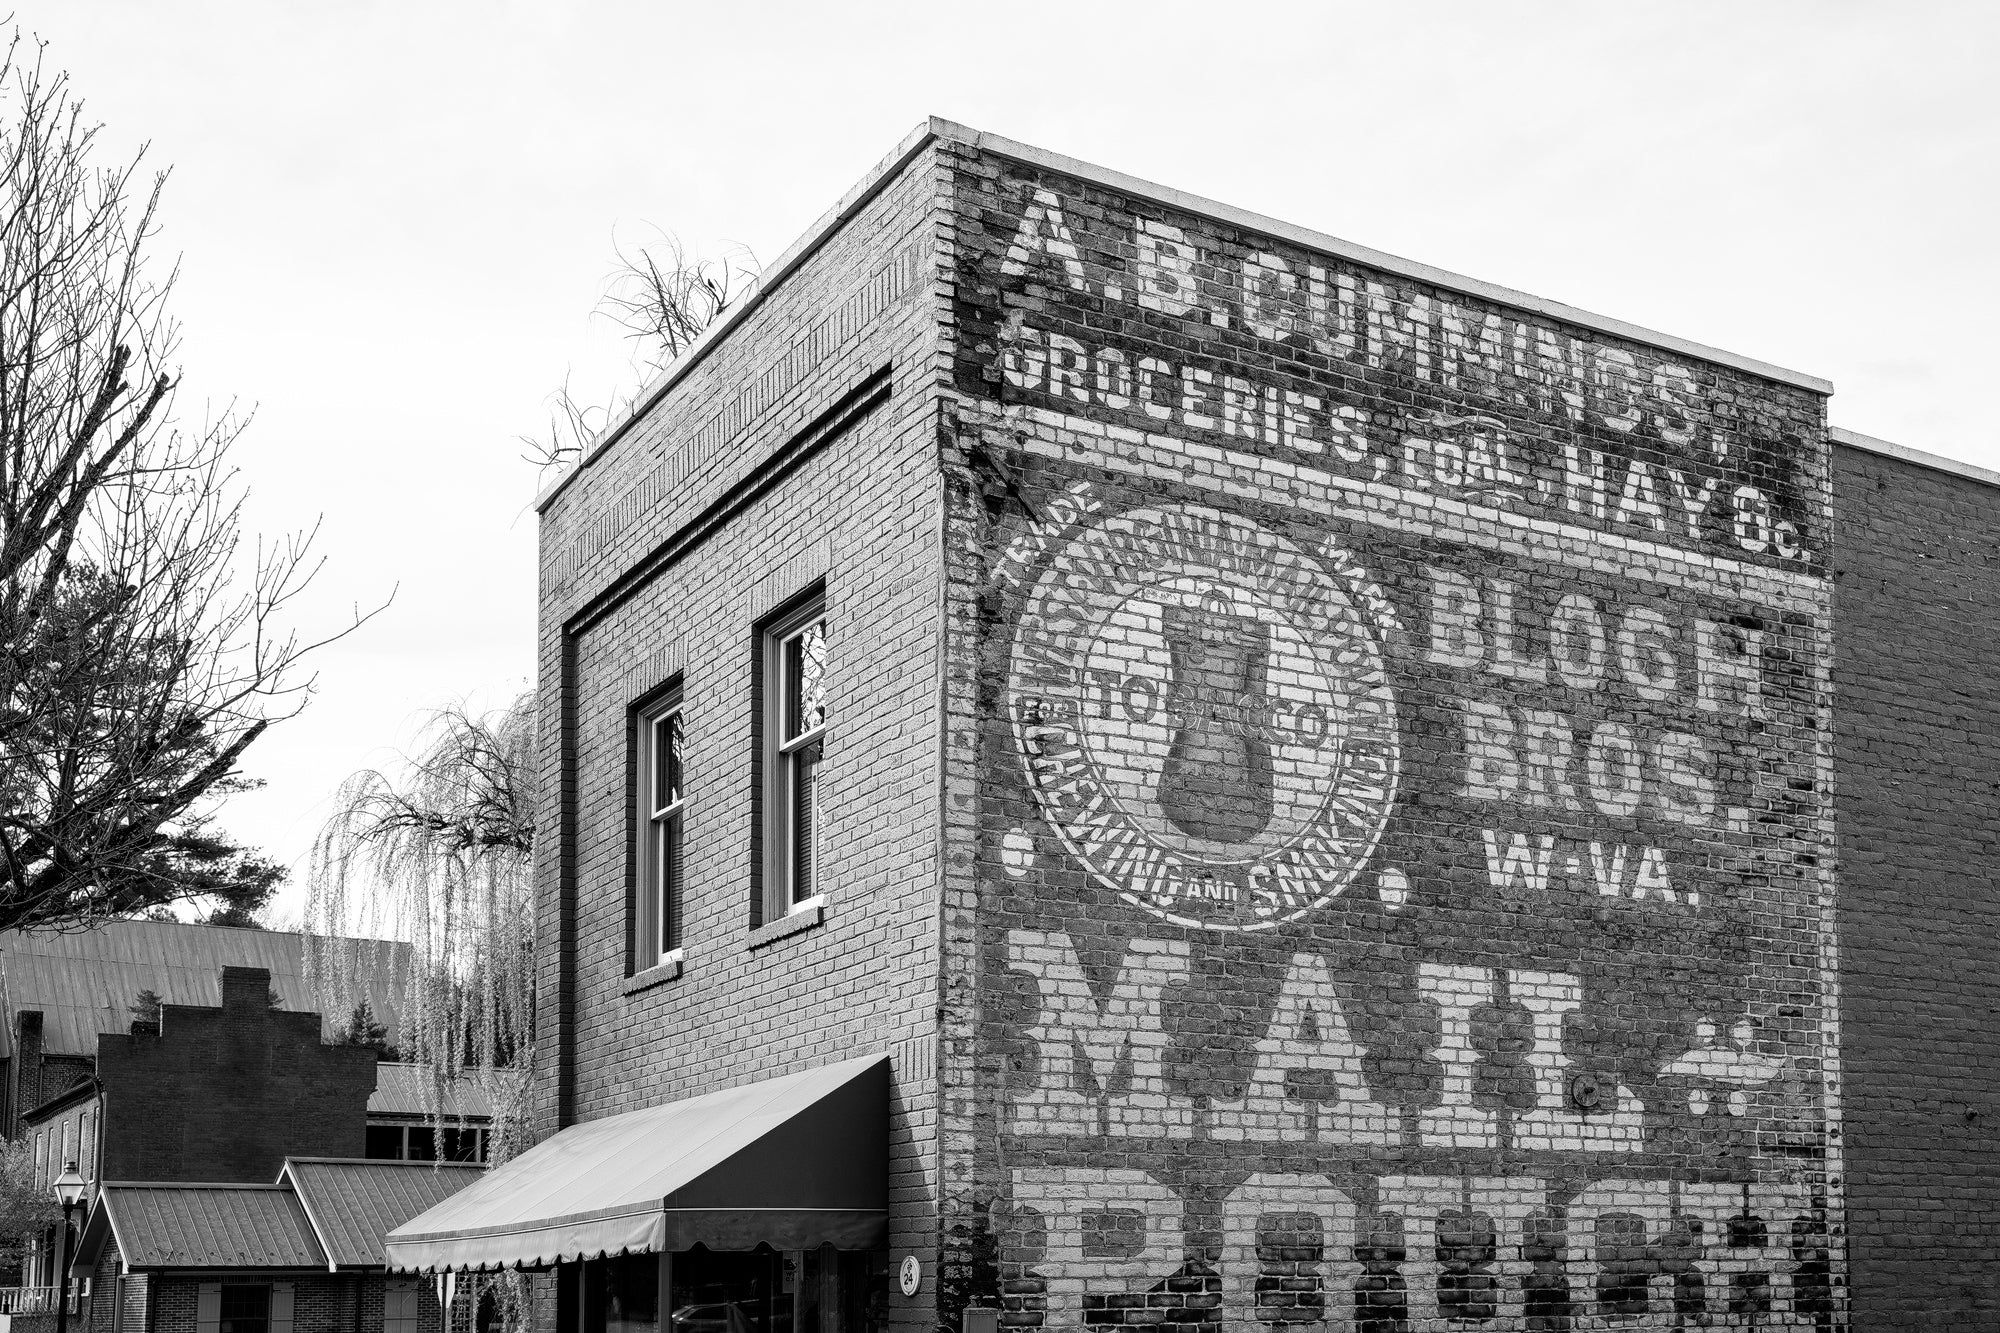 Black and white photograph of the historic Mail Pouch ghost sign in Jonesborough, Tennessee